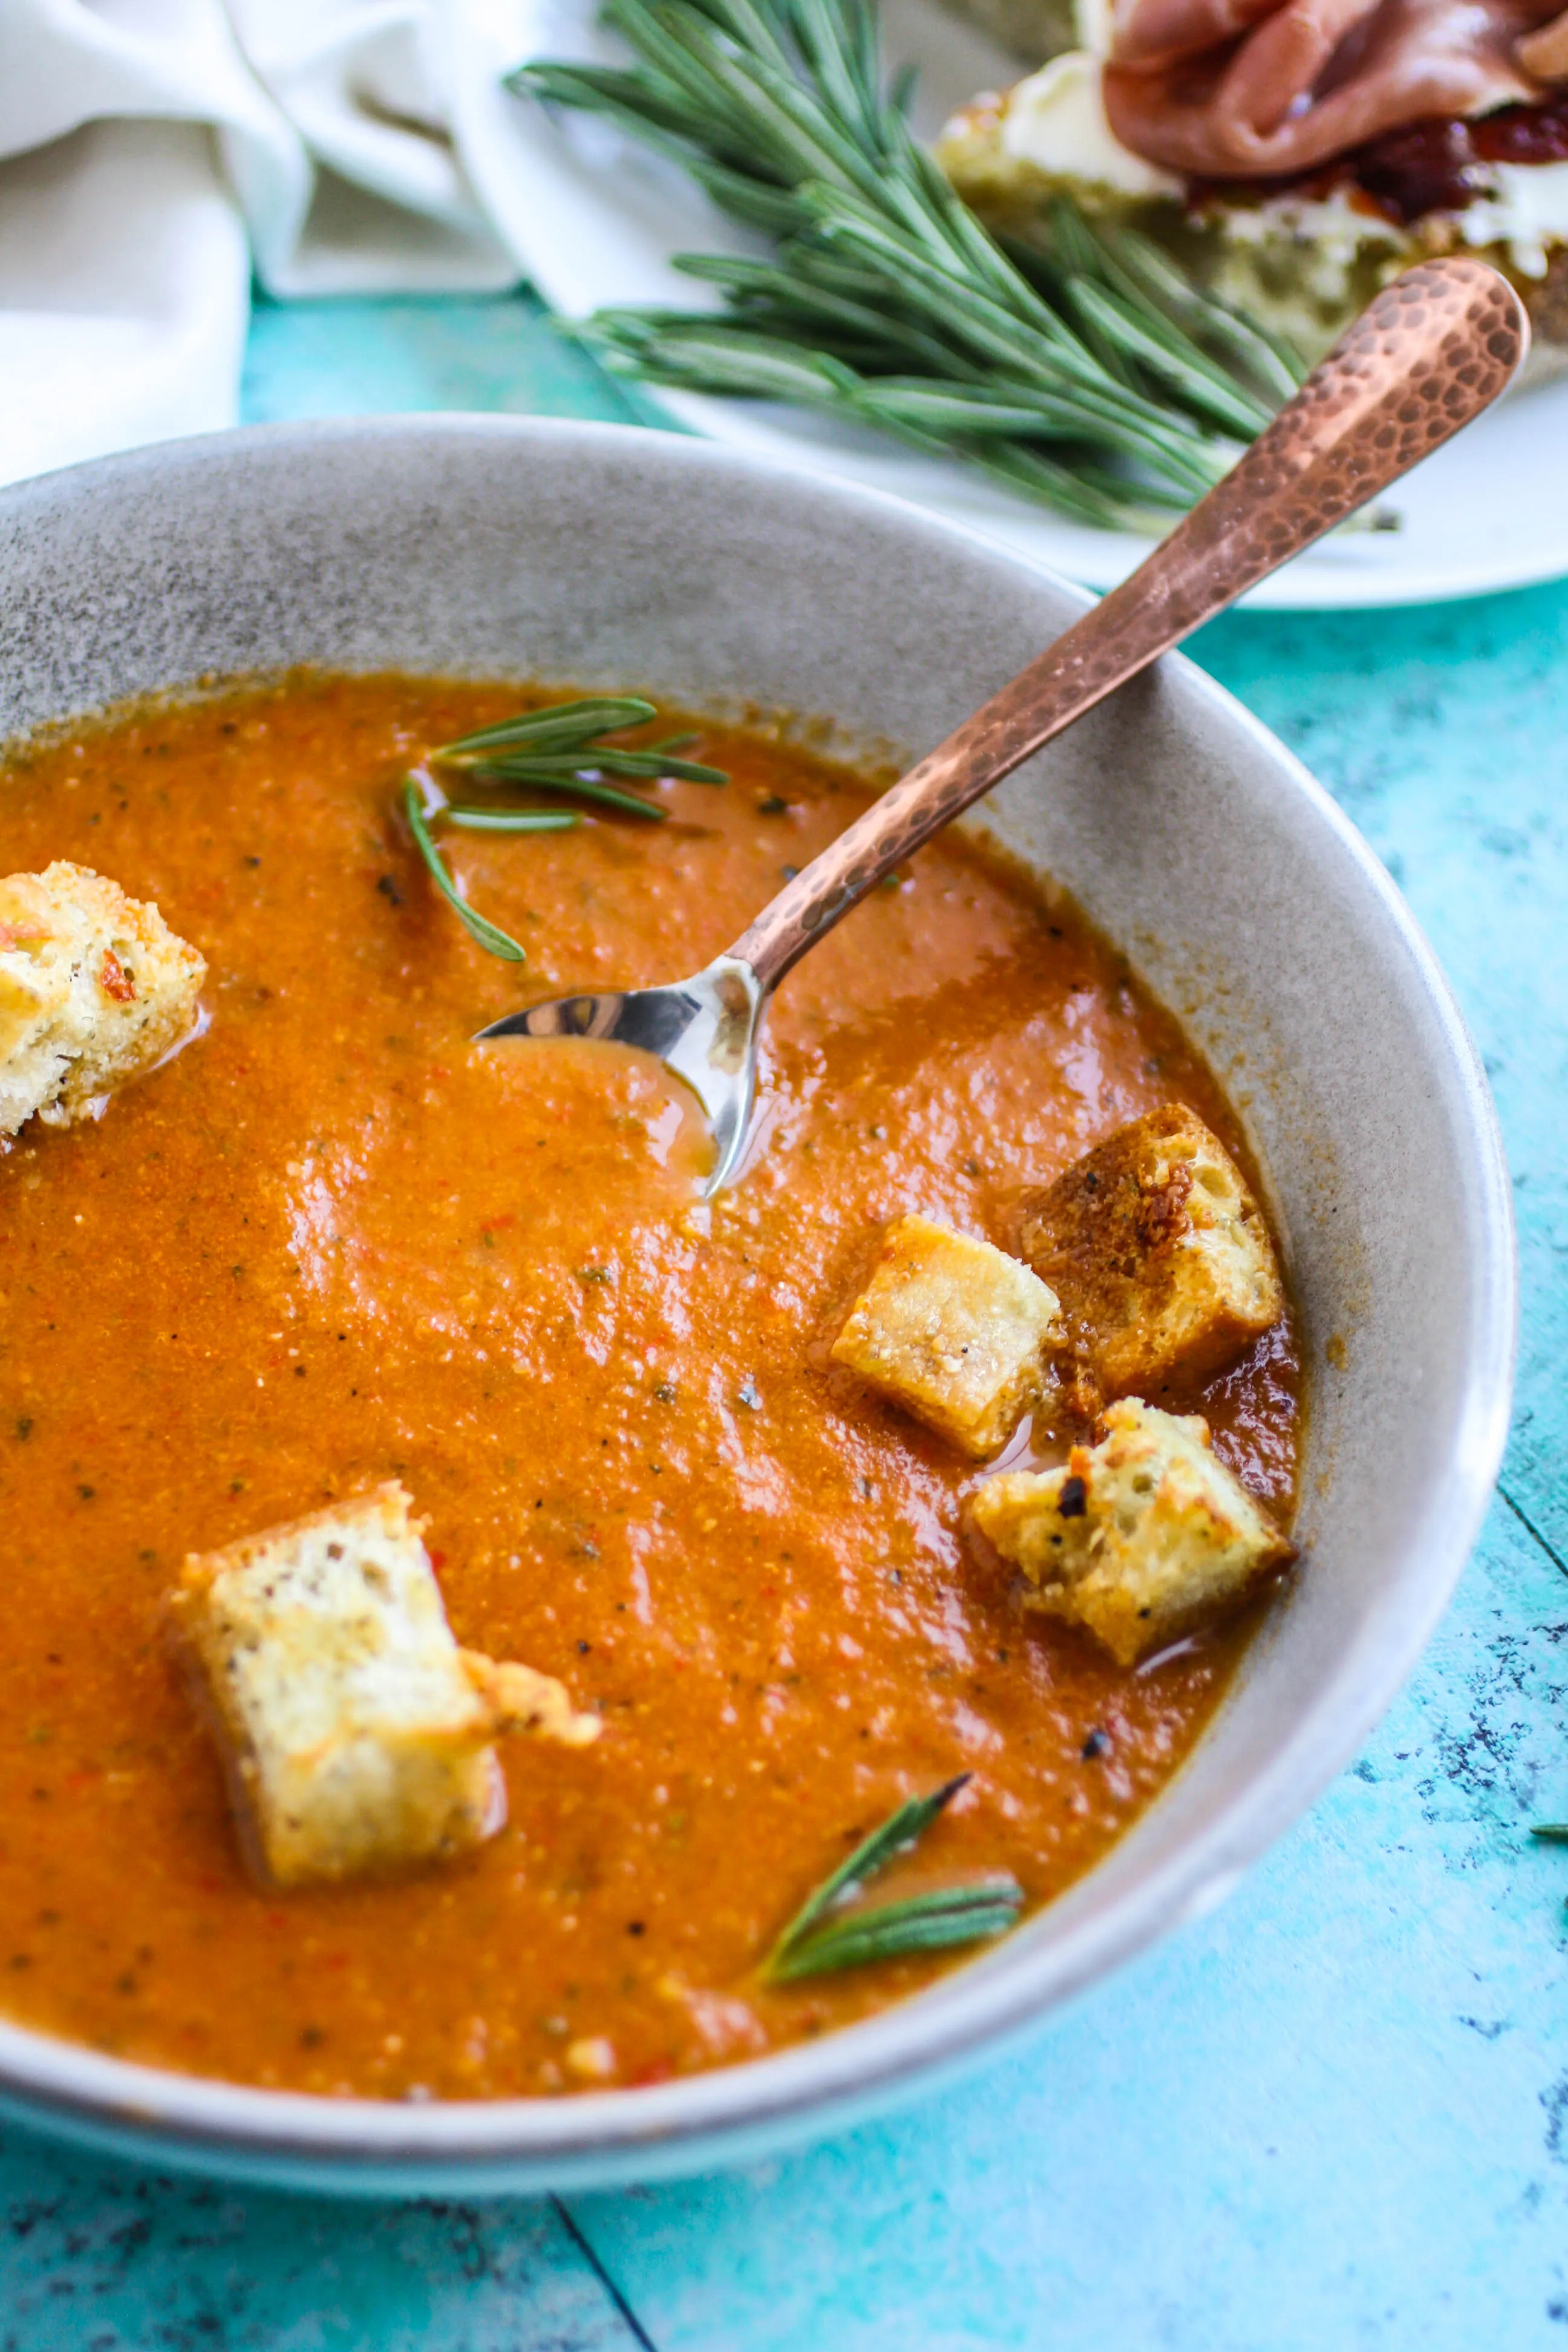 Roasted tomato and vegetable soup with gin drizzle is an ideal soup for the season. Roasted tomato and vegetable soup with gin drizzle is comforting and flavorful for a seasonal dish.